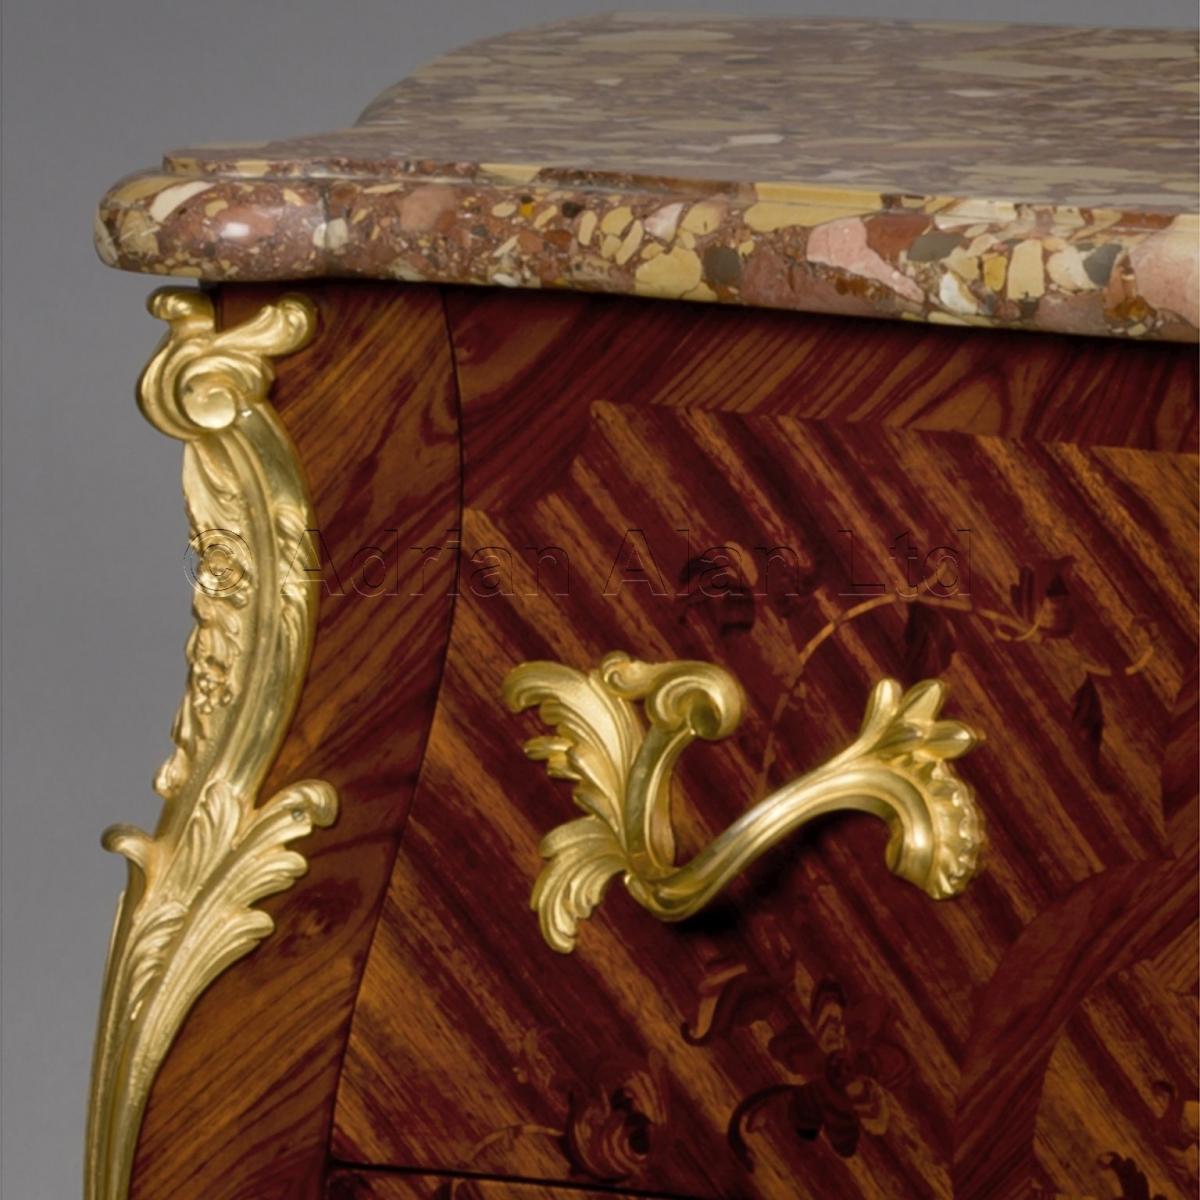 Louis XV Style Marquetry Inlaid Commode